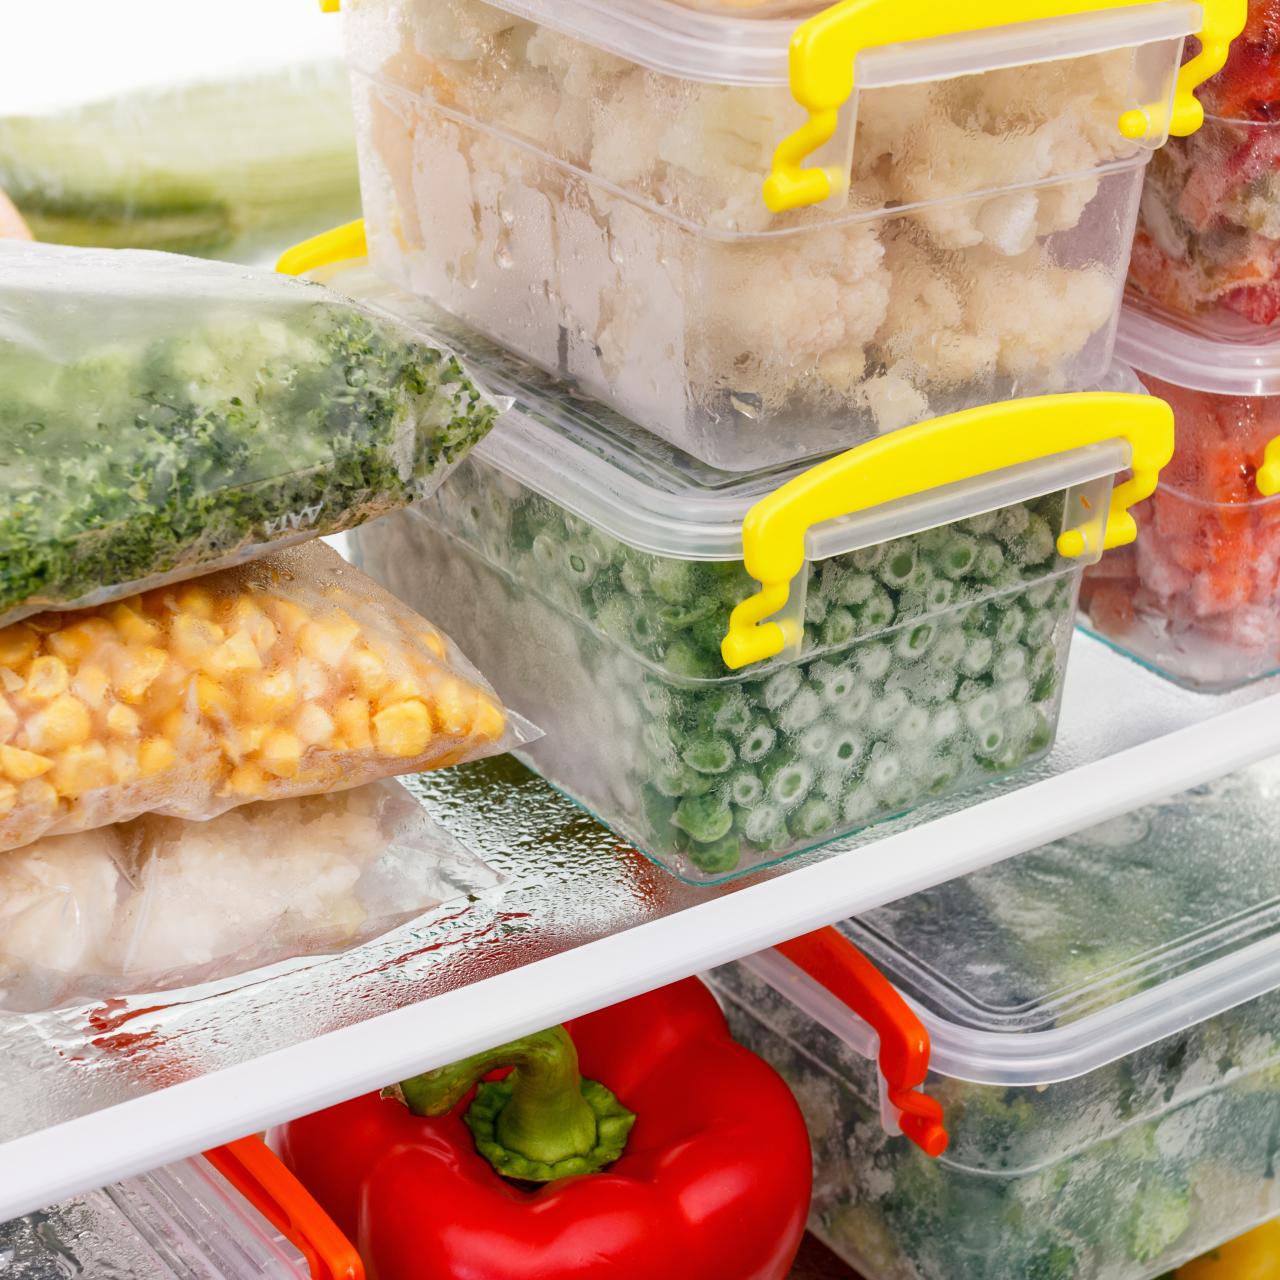 7 Freezer-Safe Containers You Can Put in the Oven, FN Dish -  Behind-the-Scenes, Food Trends, and Best Recipes : Food Network